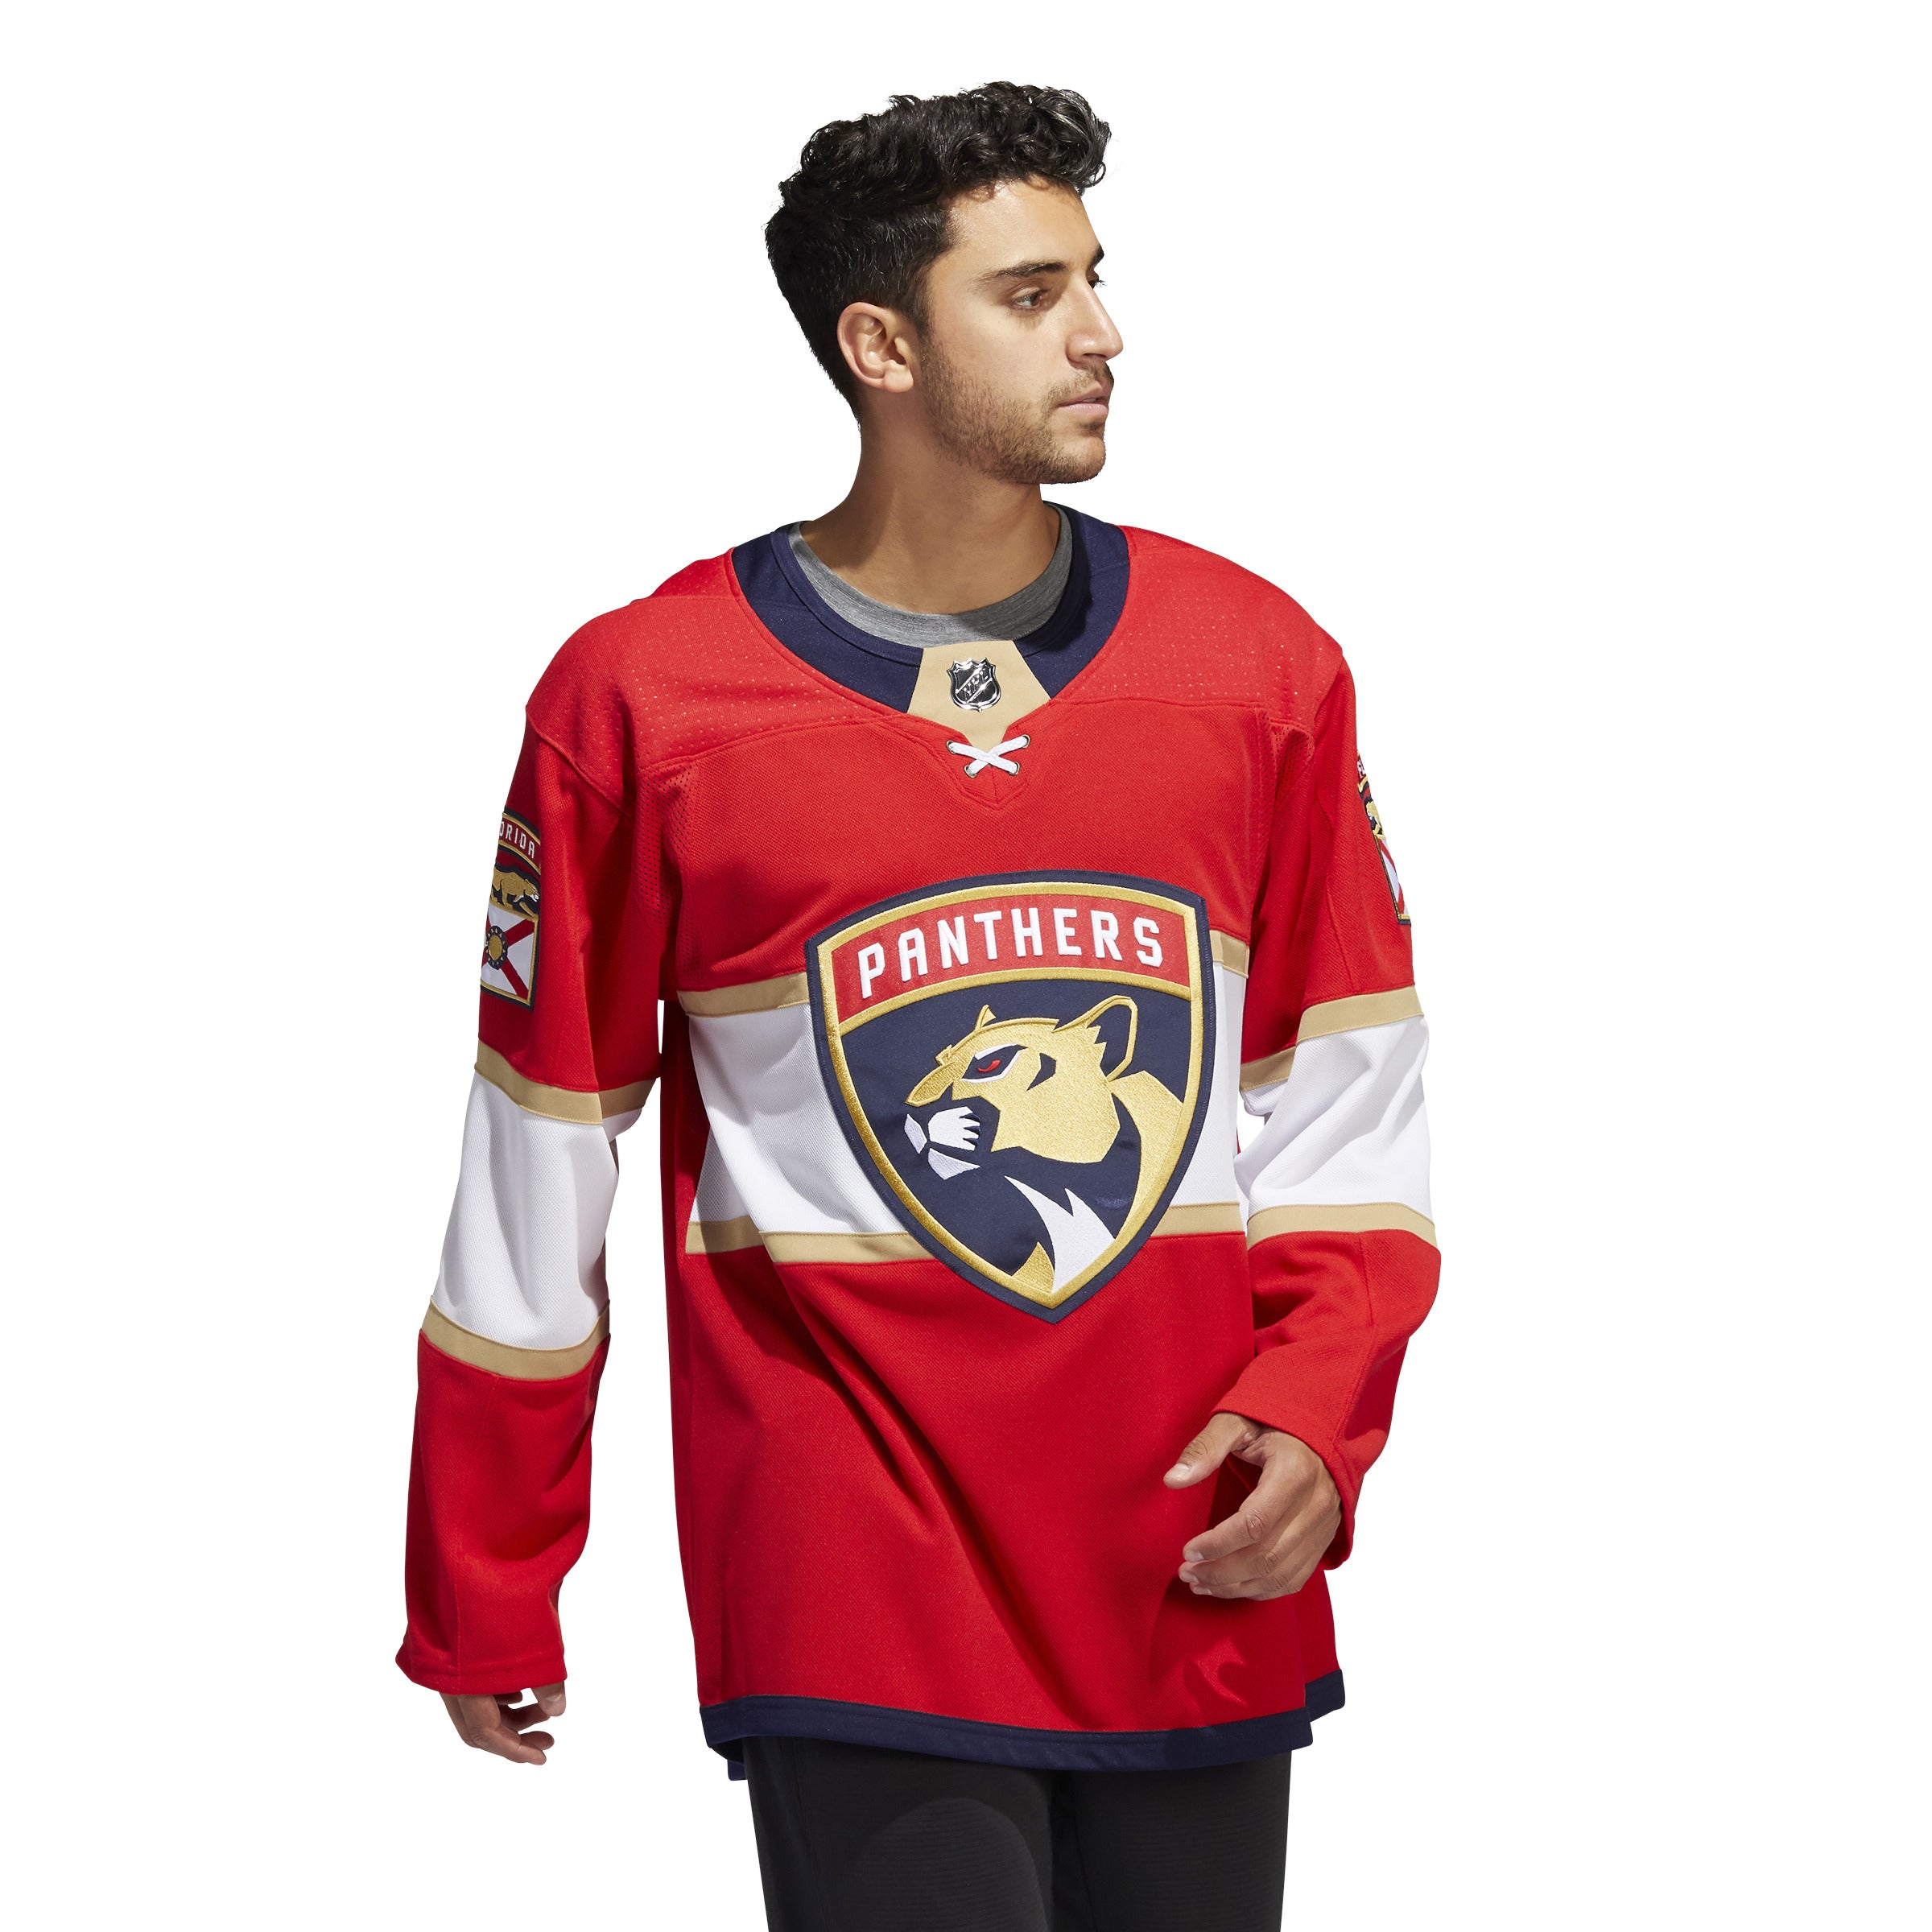 Women's Florida Panthers Gear & Gifts, Womens Panthers Apparel